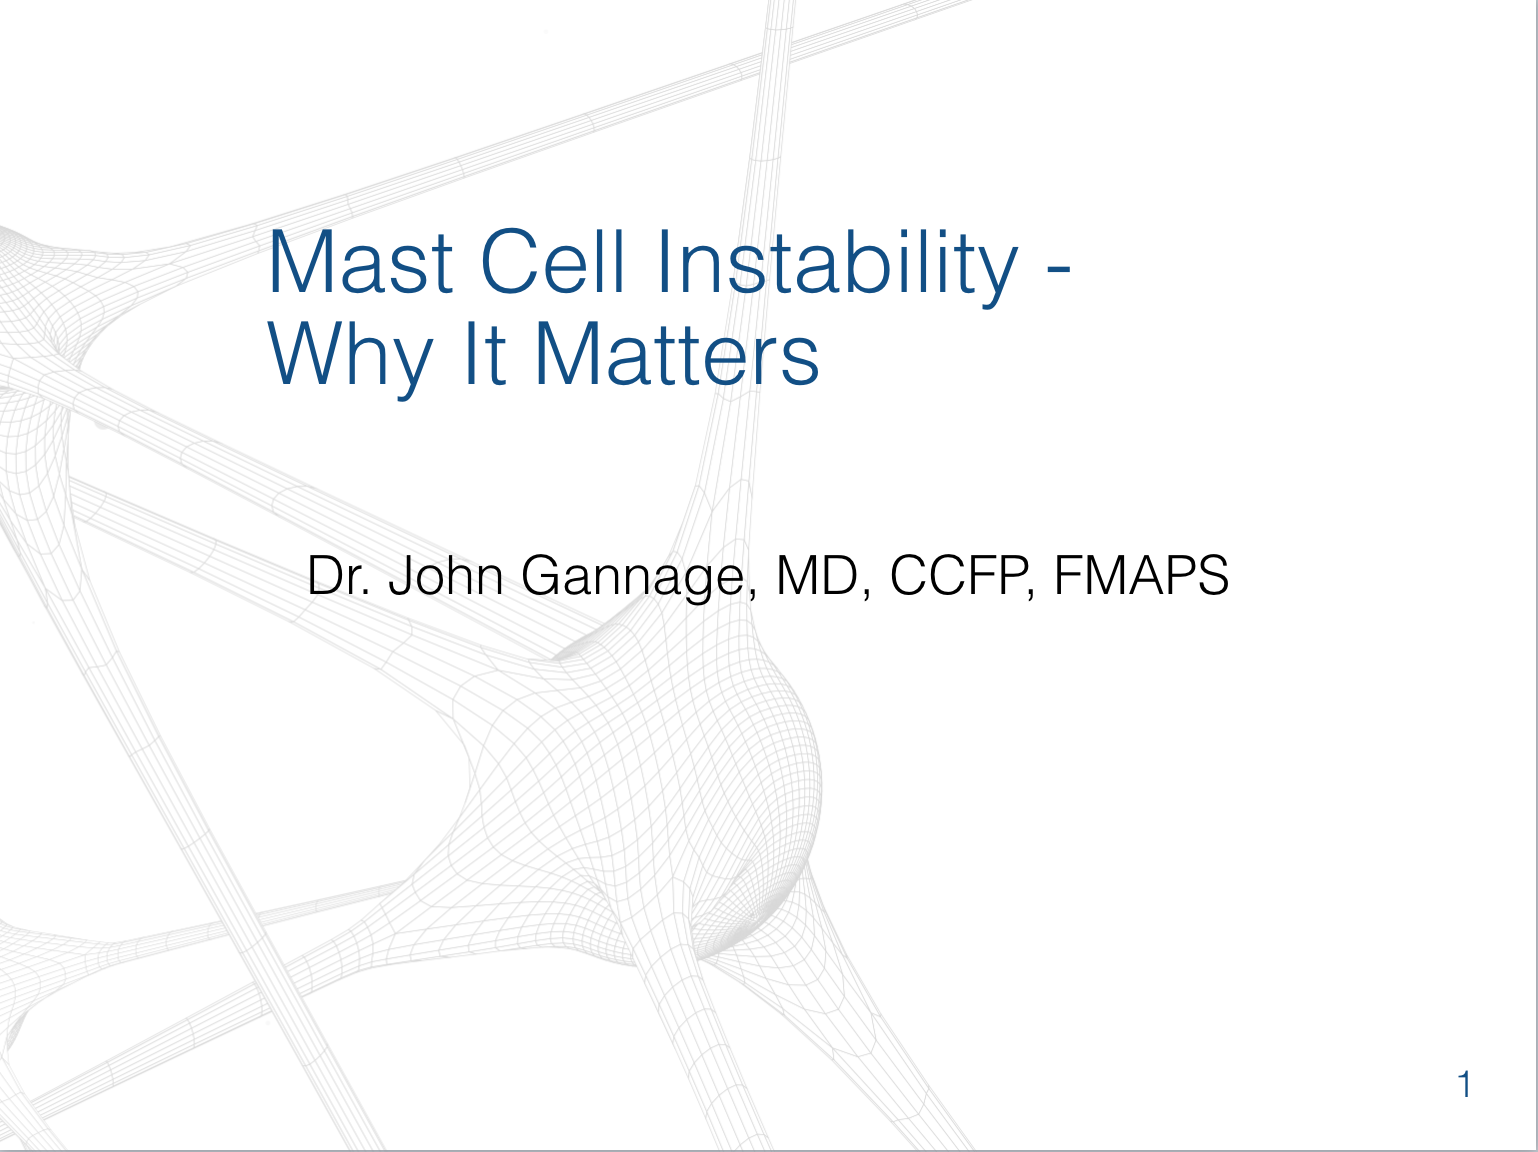 mast cell instability